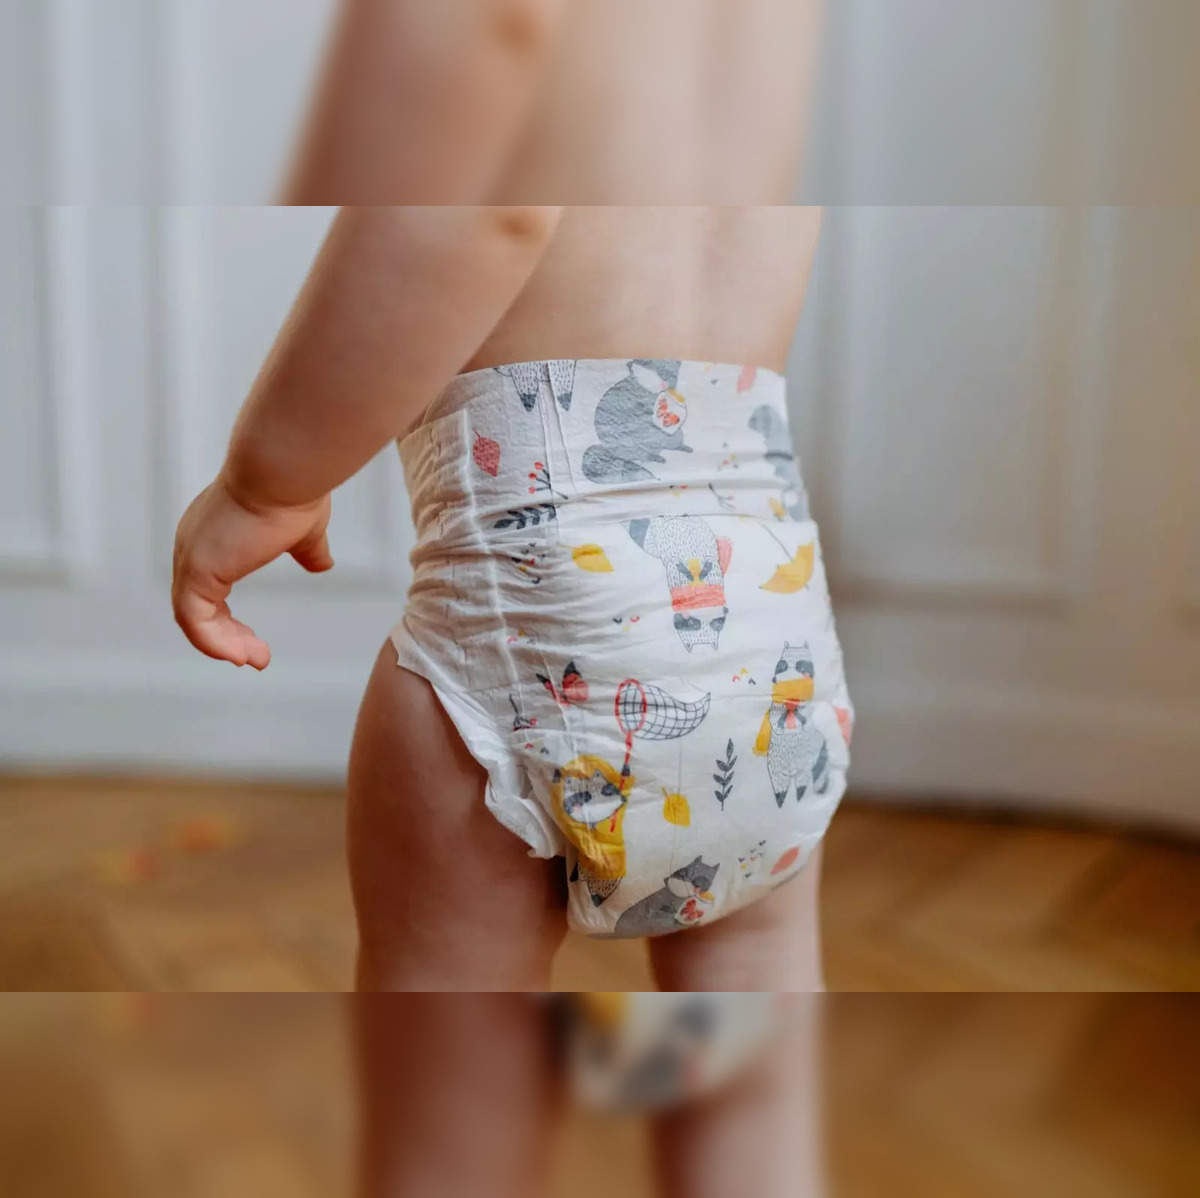 Best Baby Diapers: Best baby diapers (Large) for comfort and